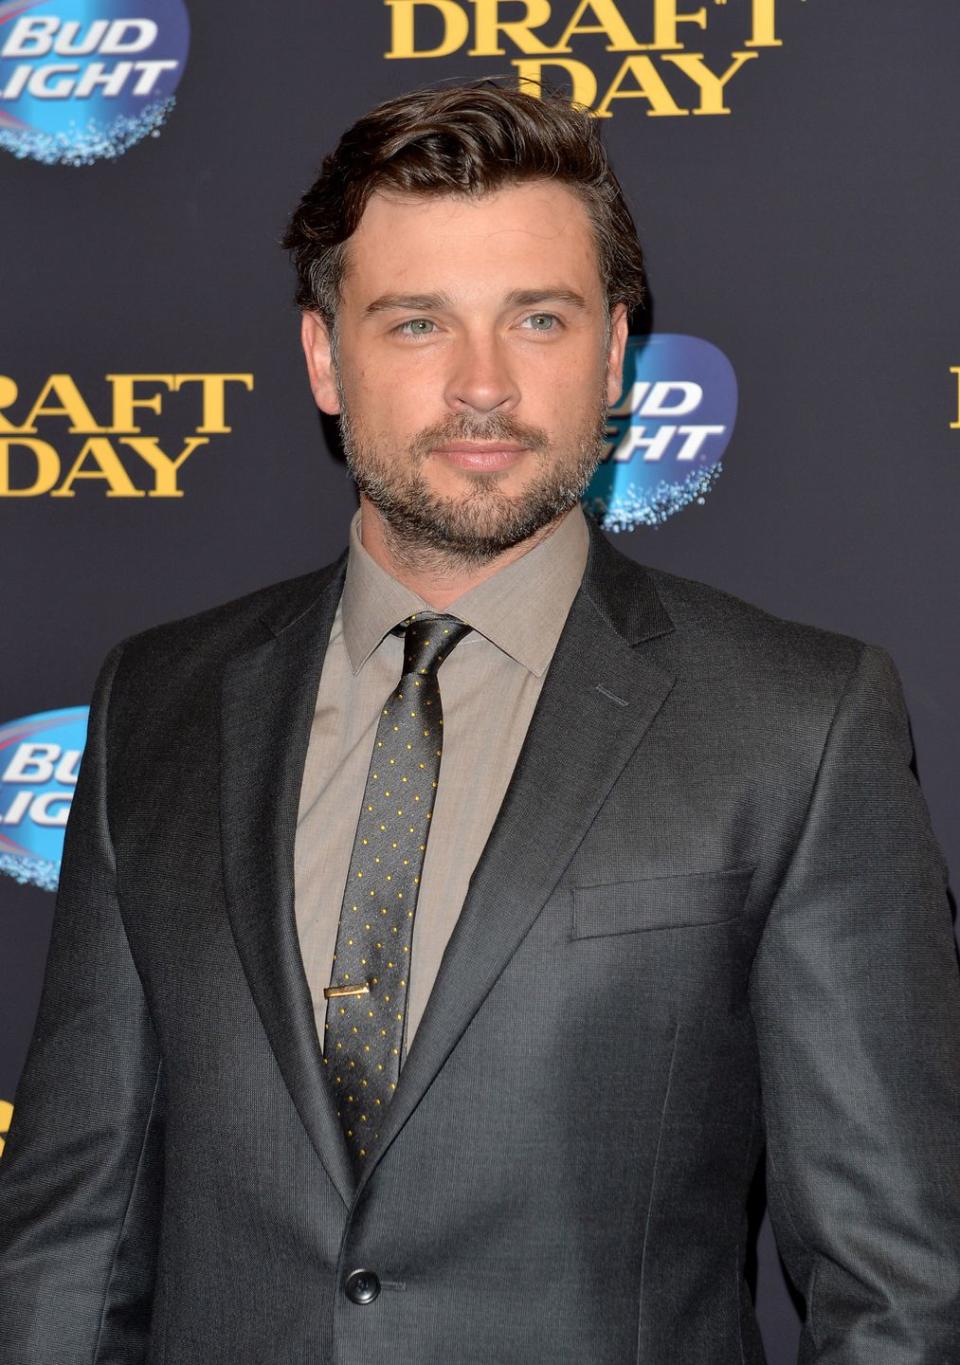 NOW: Tom Welling